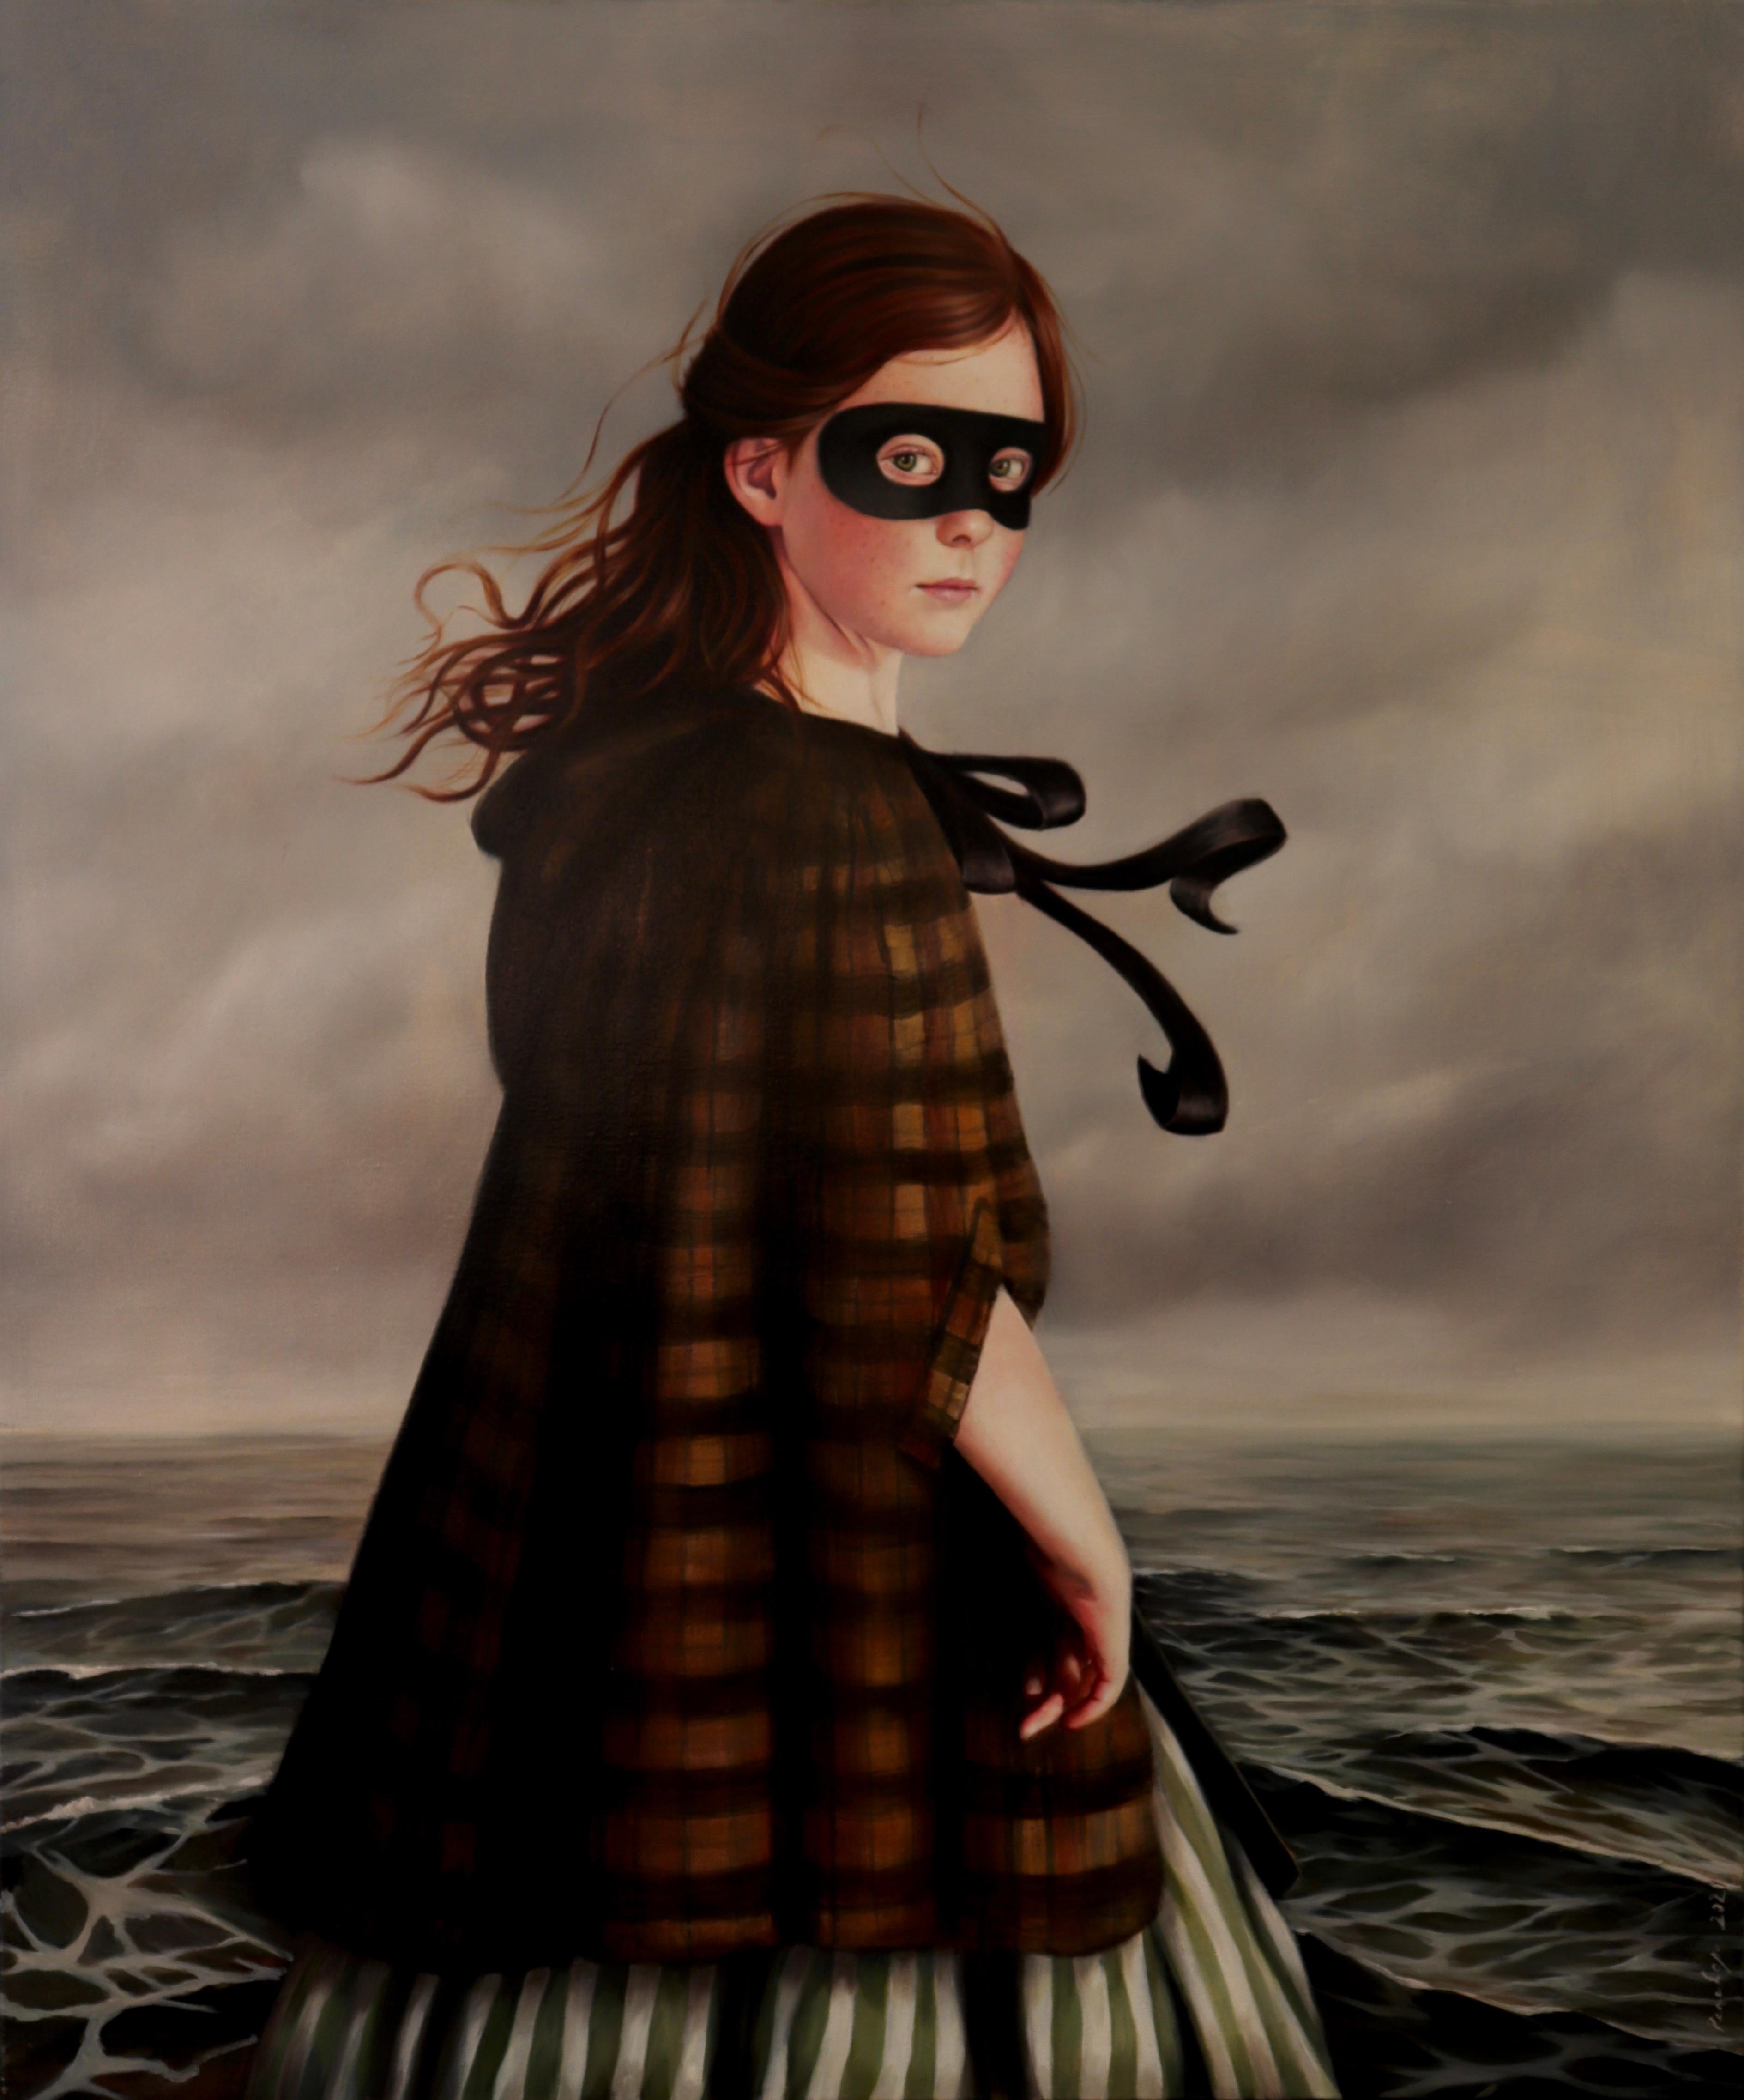 Silent Grey - Oil Painting, Girl in Mask with Ocean, Old World Dress, Portrait